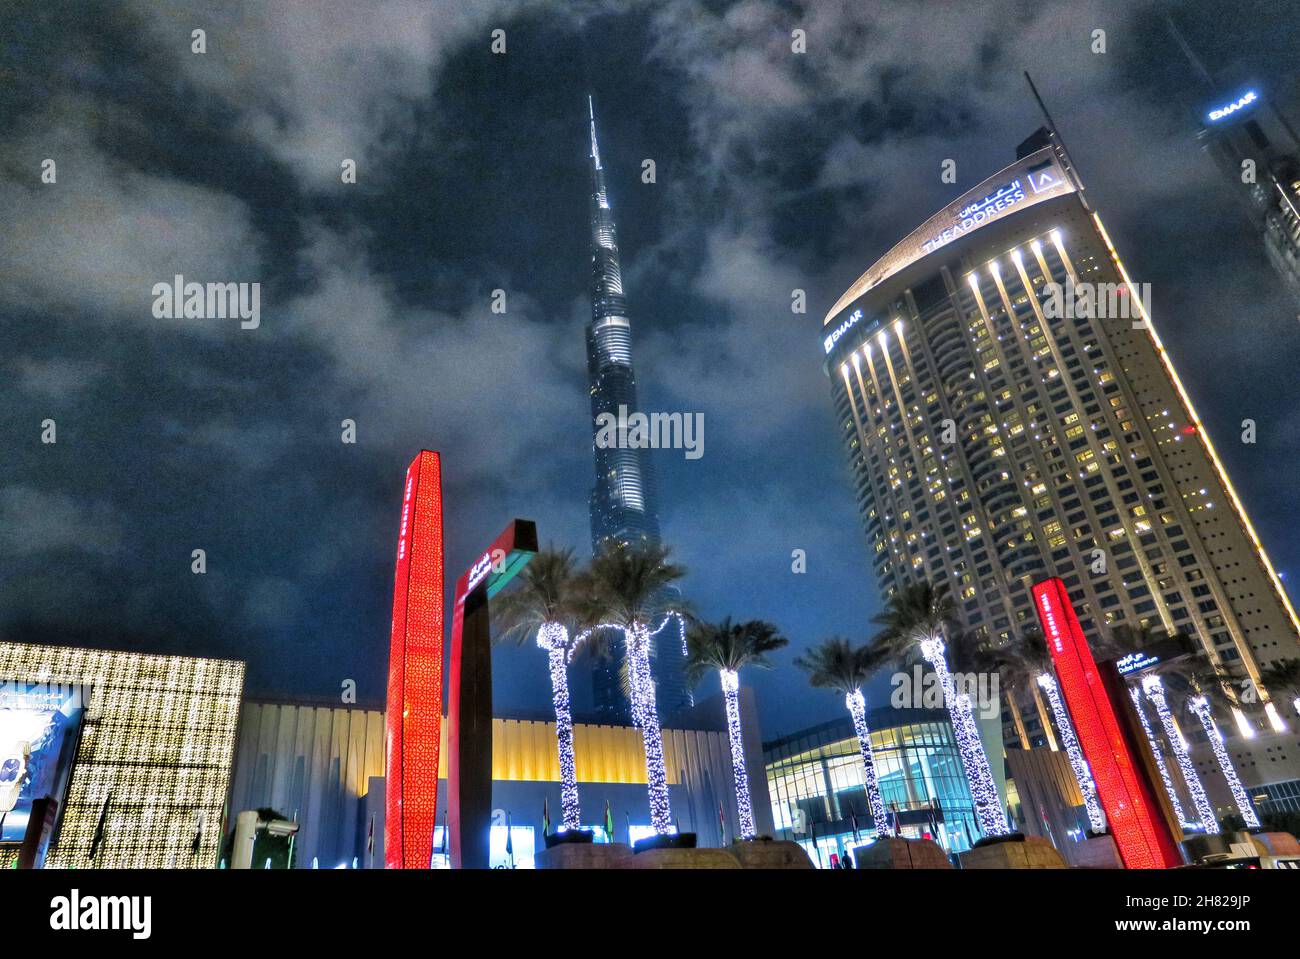 Dubai, United Arab Emirates. 20th Nov, 2016. The Adress Hotel (r) can be seen in the evening next to the slender tower of the Burj Khalifa Credit: Soeren Stache/dpa-Zentralbild/ZB/dpa/Alamy Live News Stock Photo